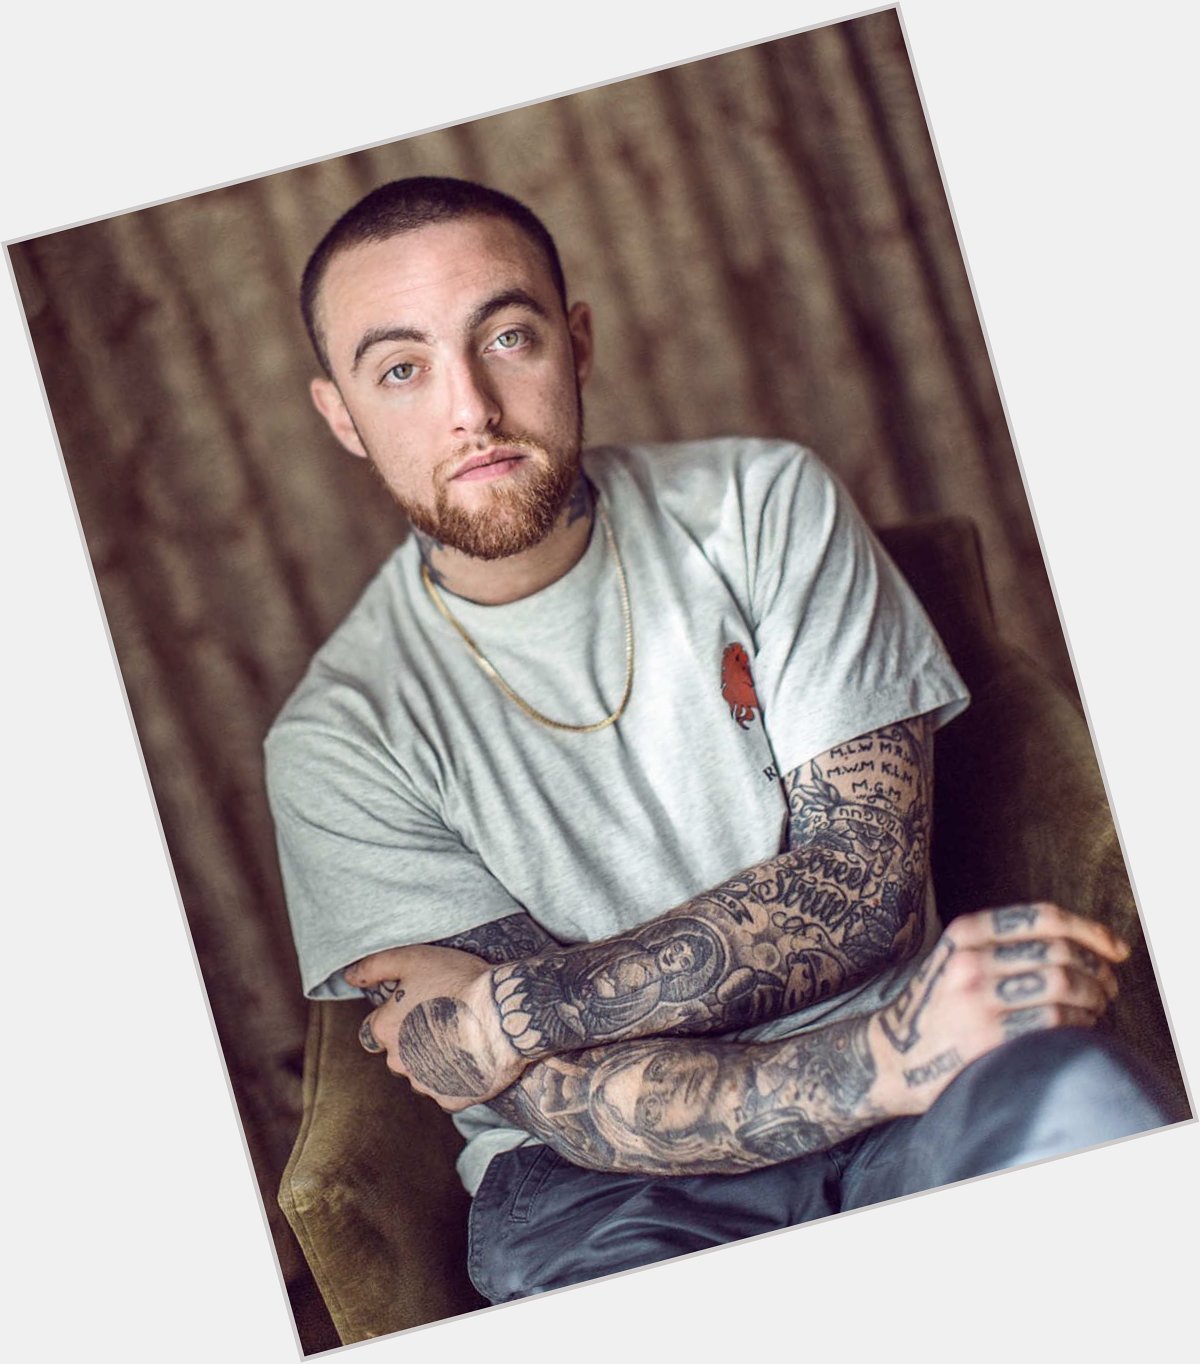 Wishing my brother Malcolm a happy 27th Bday. Legends Never Die. 

Mac Miller Forever   